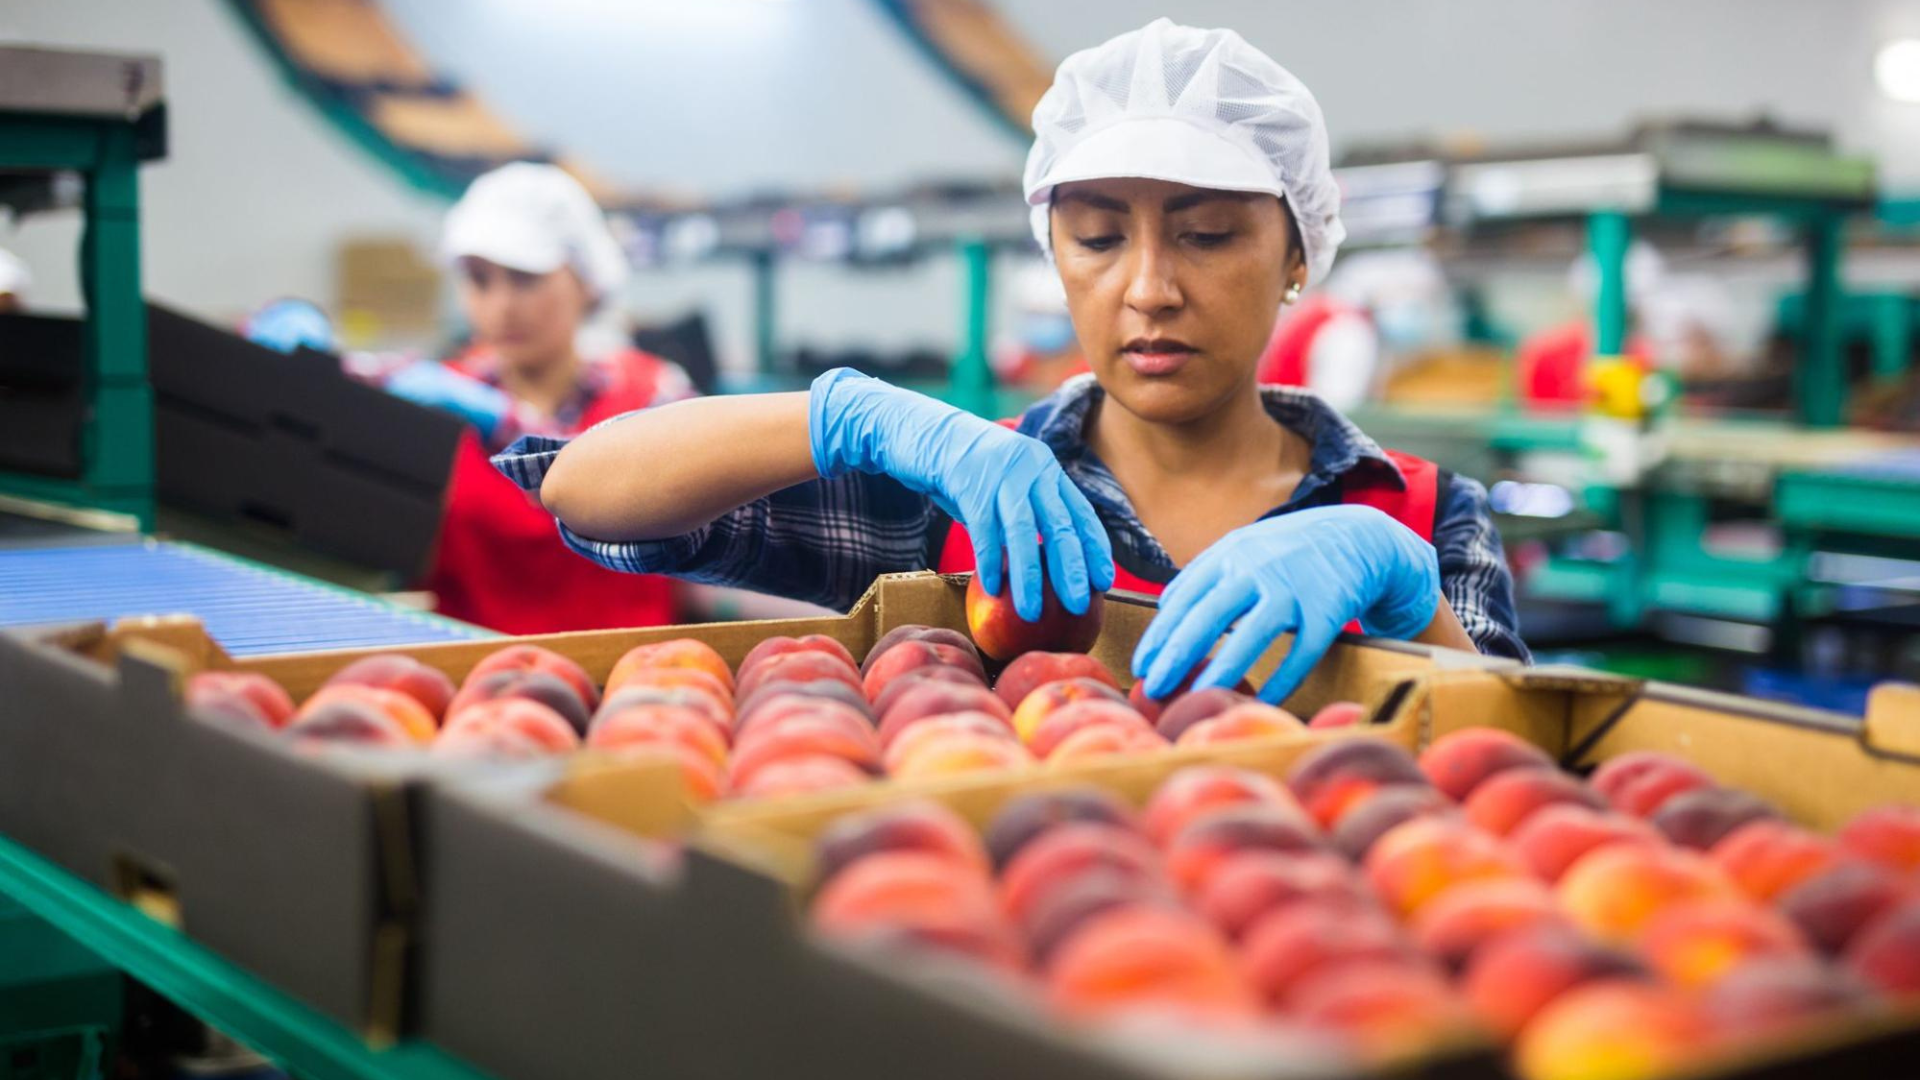 Workers in Food Manufacturing Company